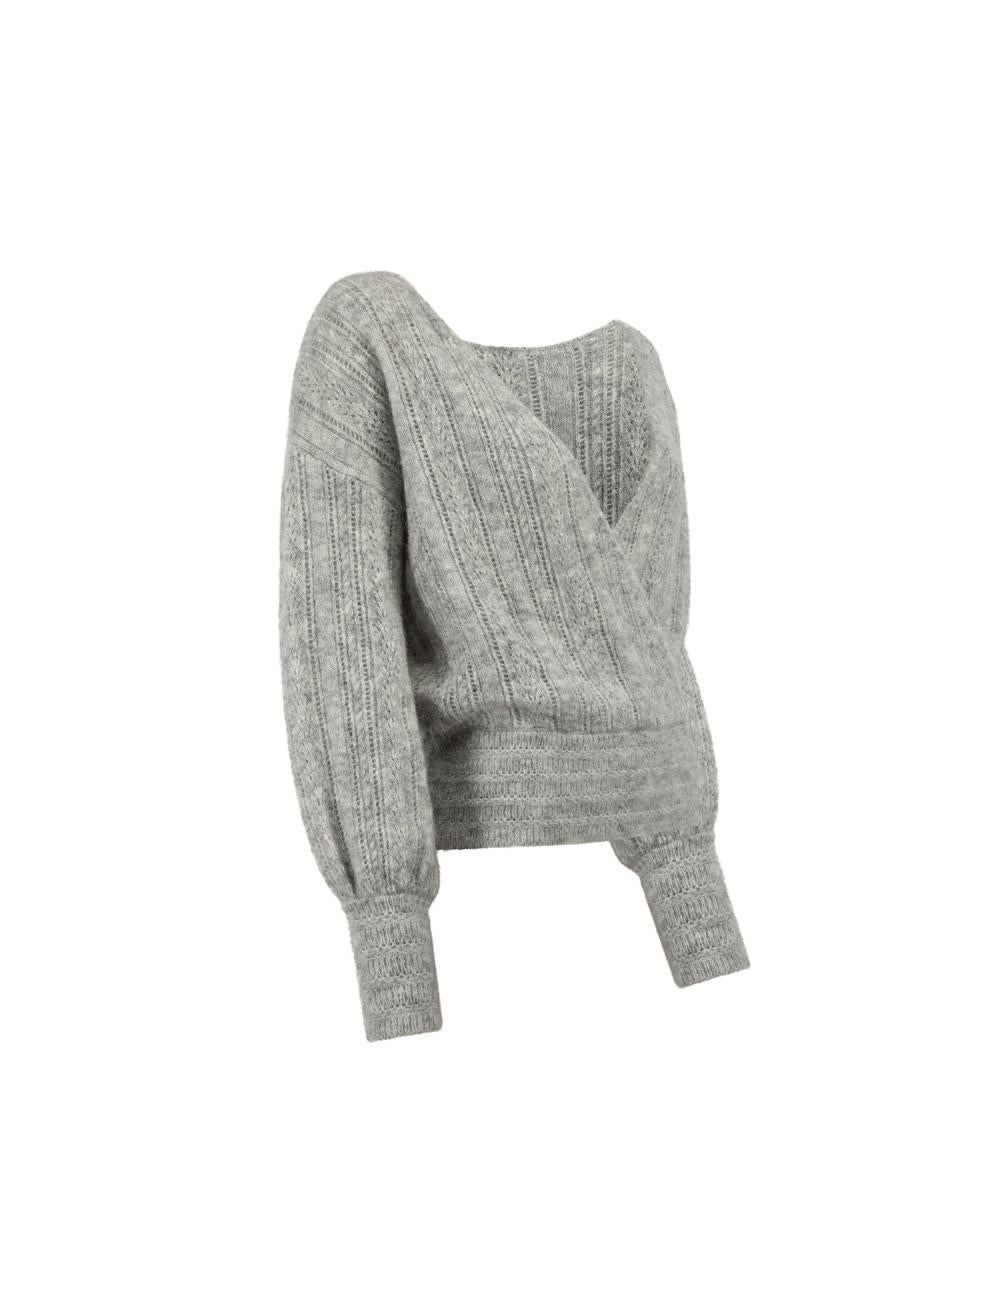 CONDITION is Very good. Hardly any visible wear to jumper is evident on this used Sézane designer resale item.



Details


Grey

Wool

Long wrap jumper

Loose knitted

Deep V neckline





Made in China



Composition

33% Polyamide, 32% Wool, 32%